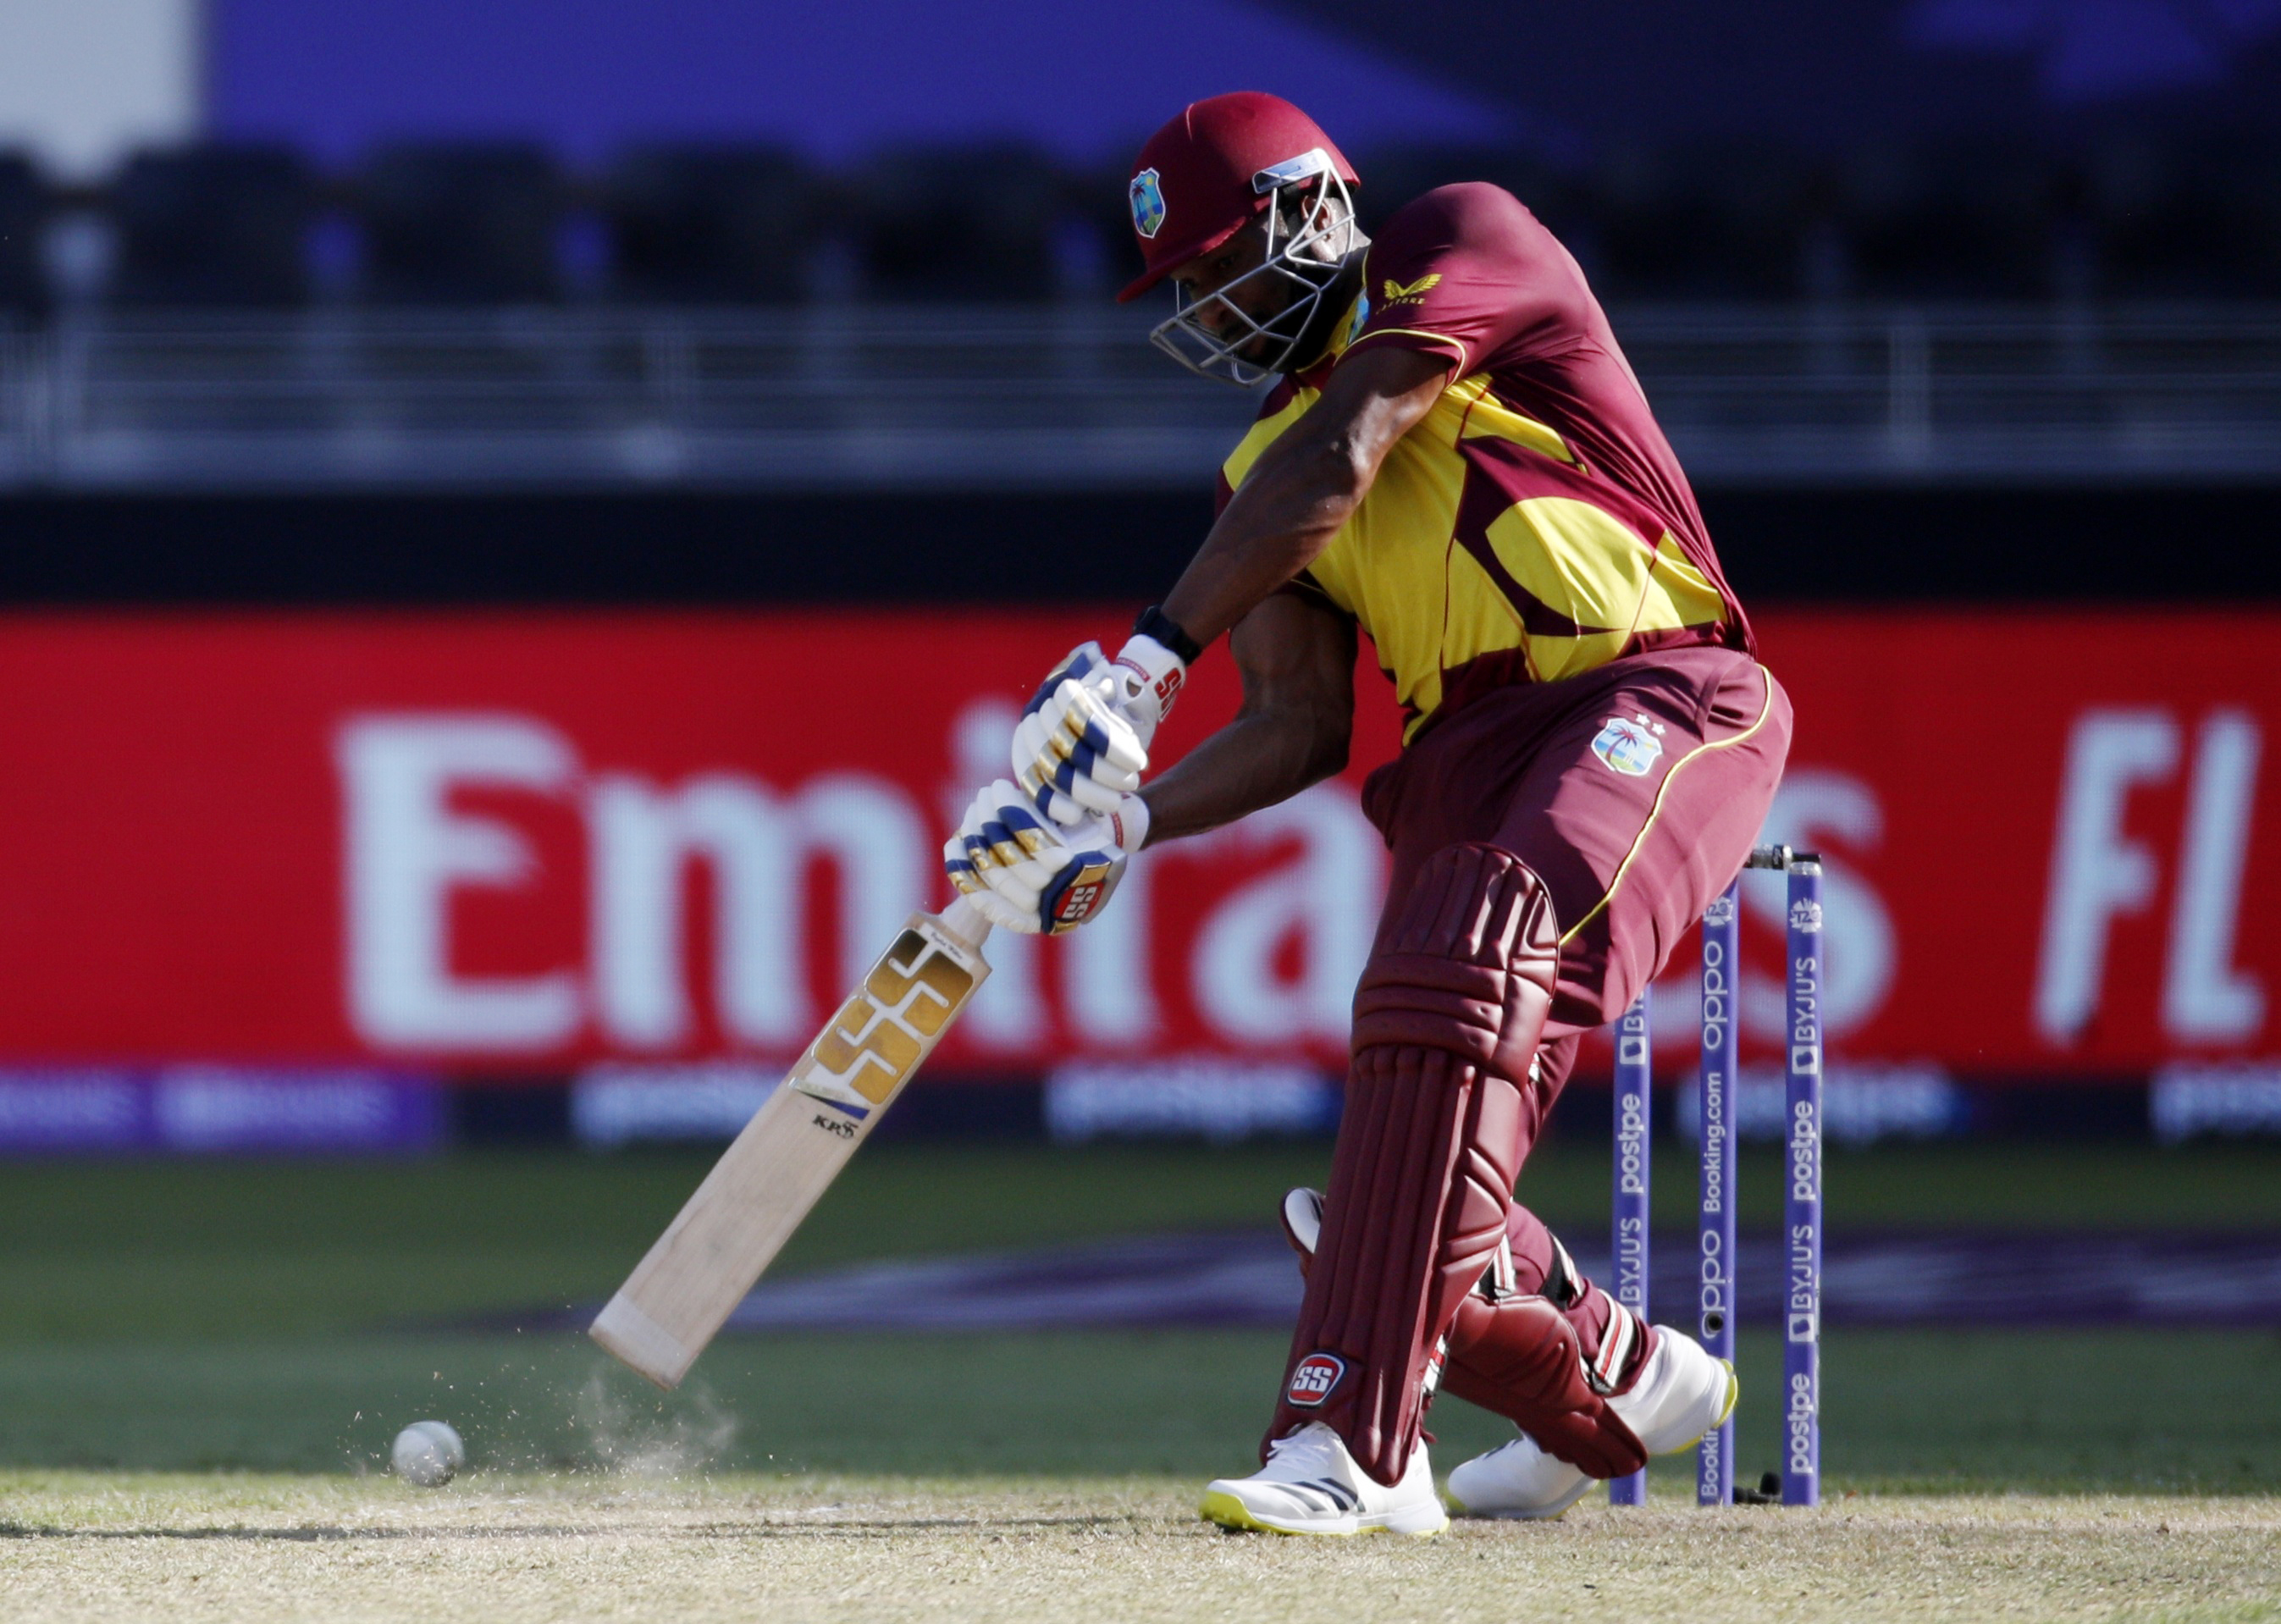 ICC Men's T20 World Cup 2021 - Super 12 - Group 1 - South Africa v West Indies